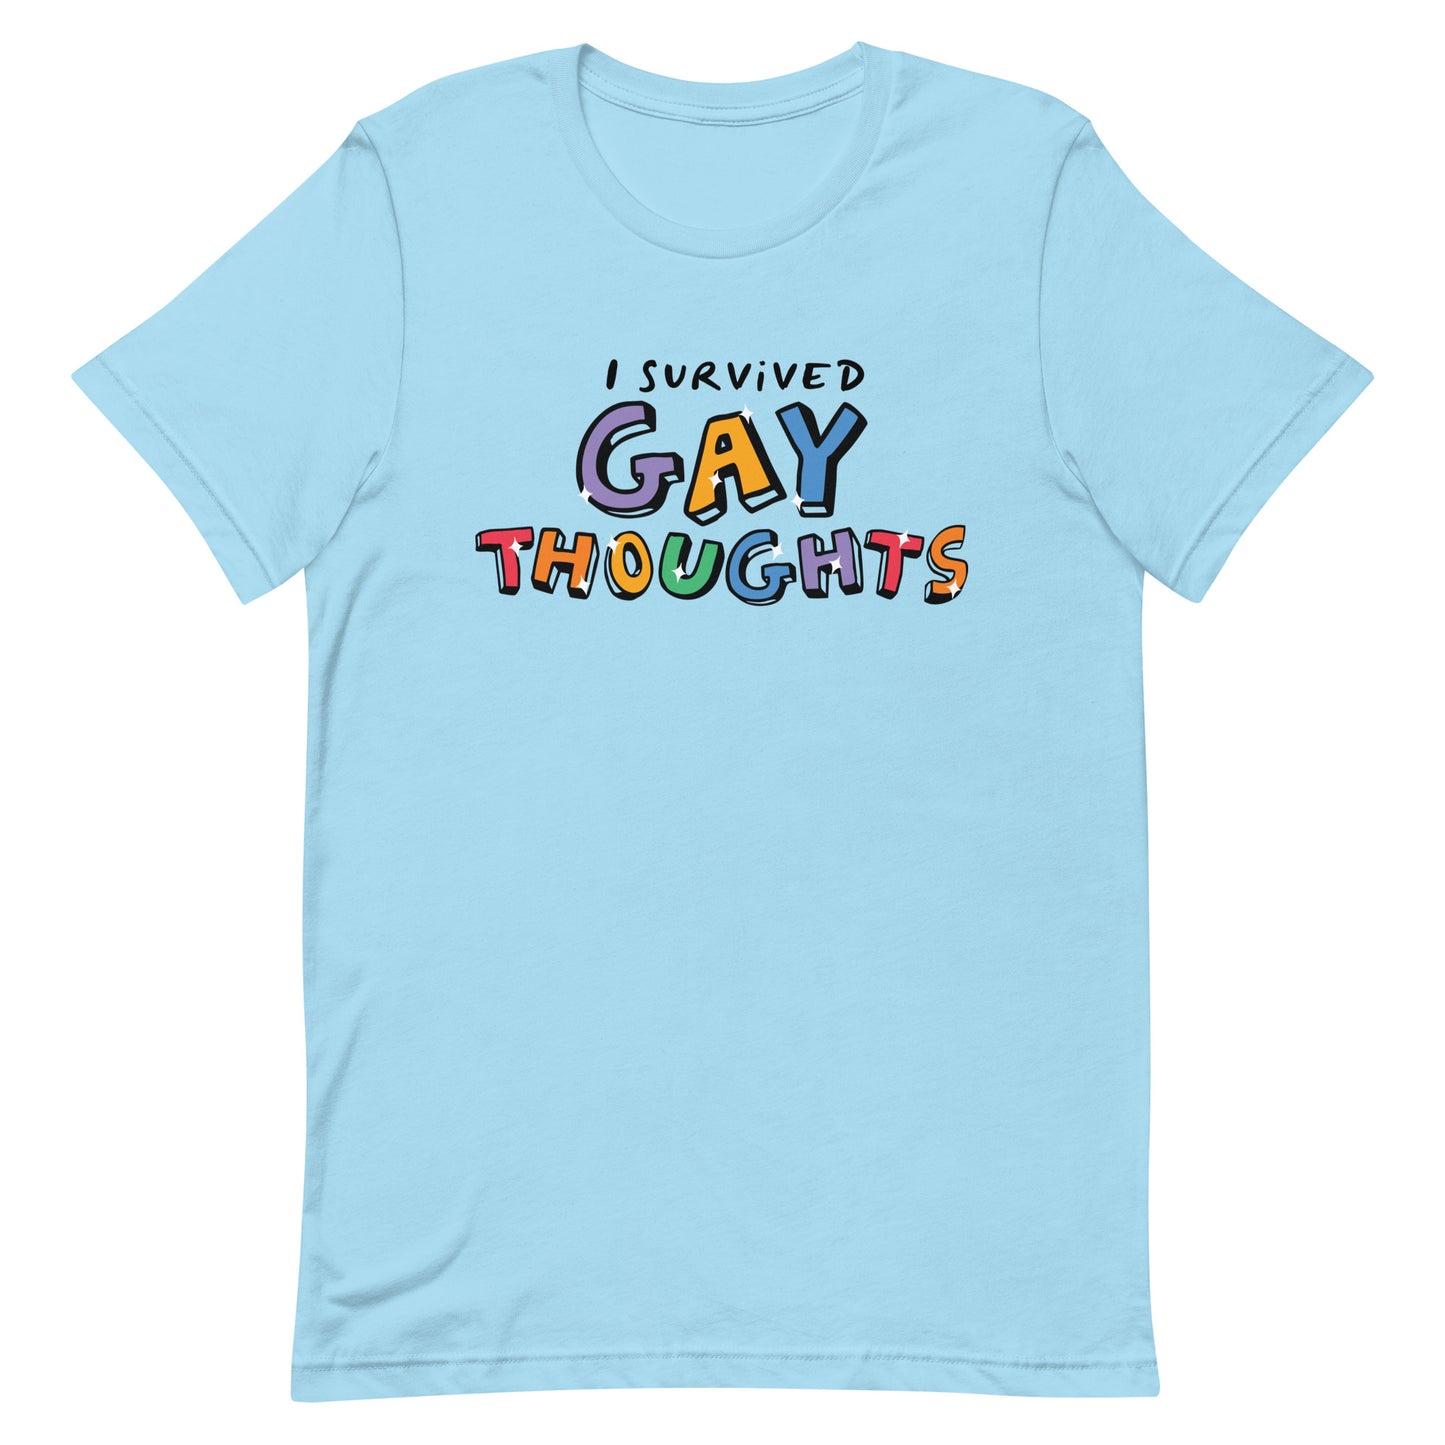 I Survived Gay Thoughts Unisex t-shirt